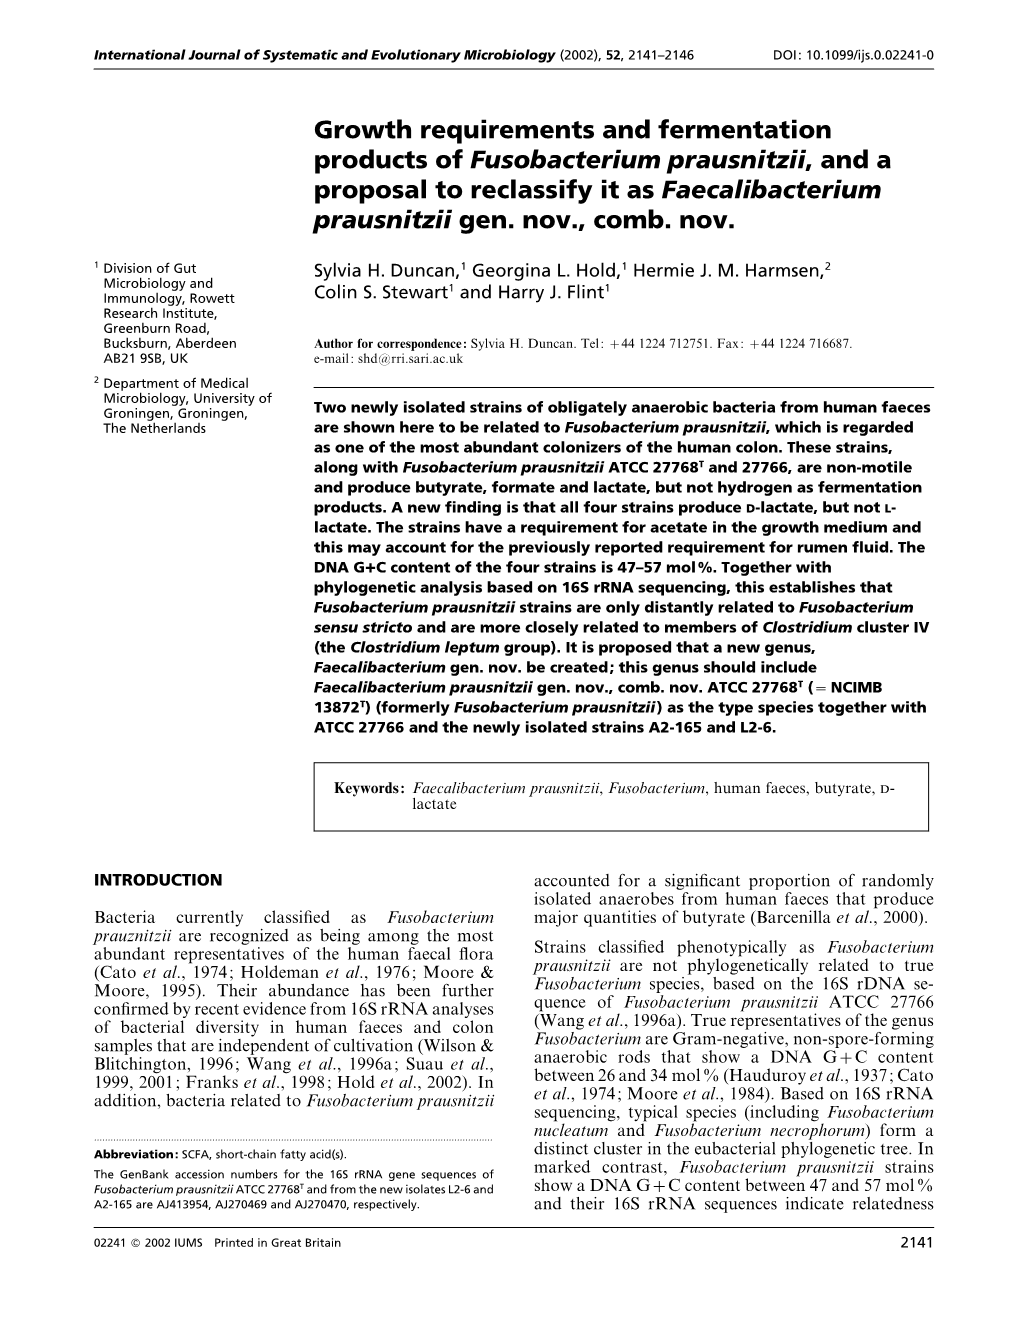 Growth Requirements and Fermentation Products of Fusobacterium Prausnitzii, and a Proposal to Reclassify It As Faecalibacterium Prausnitzii Gen